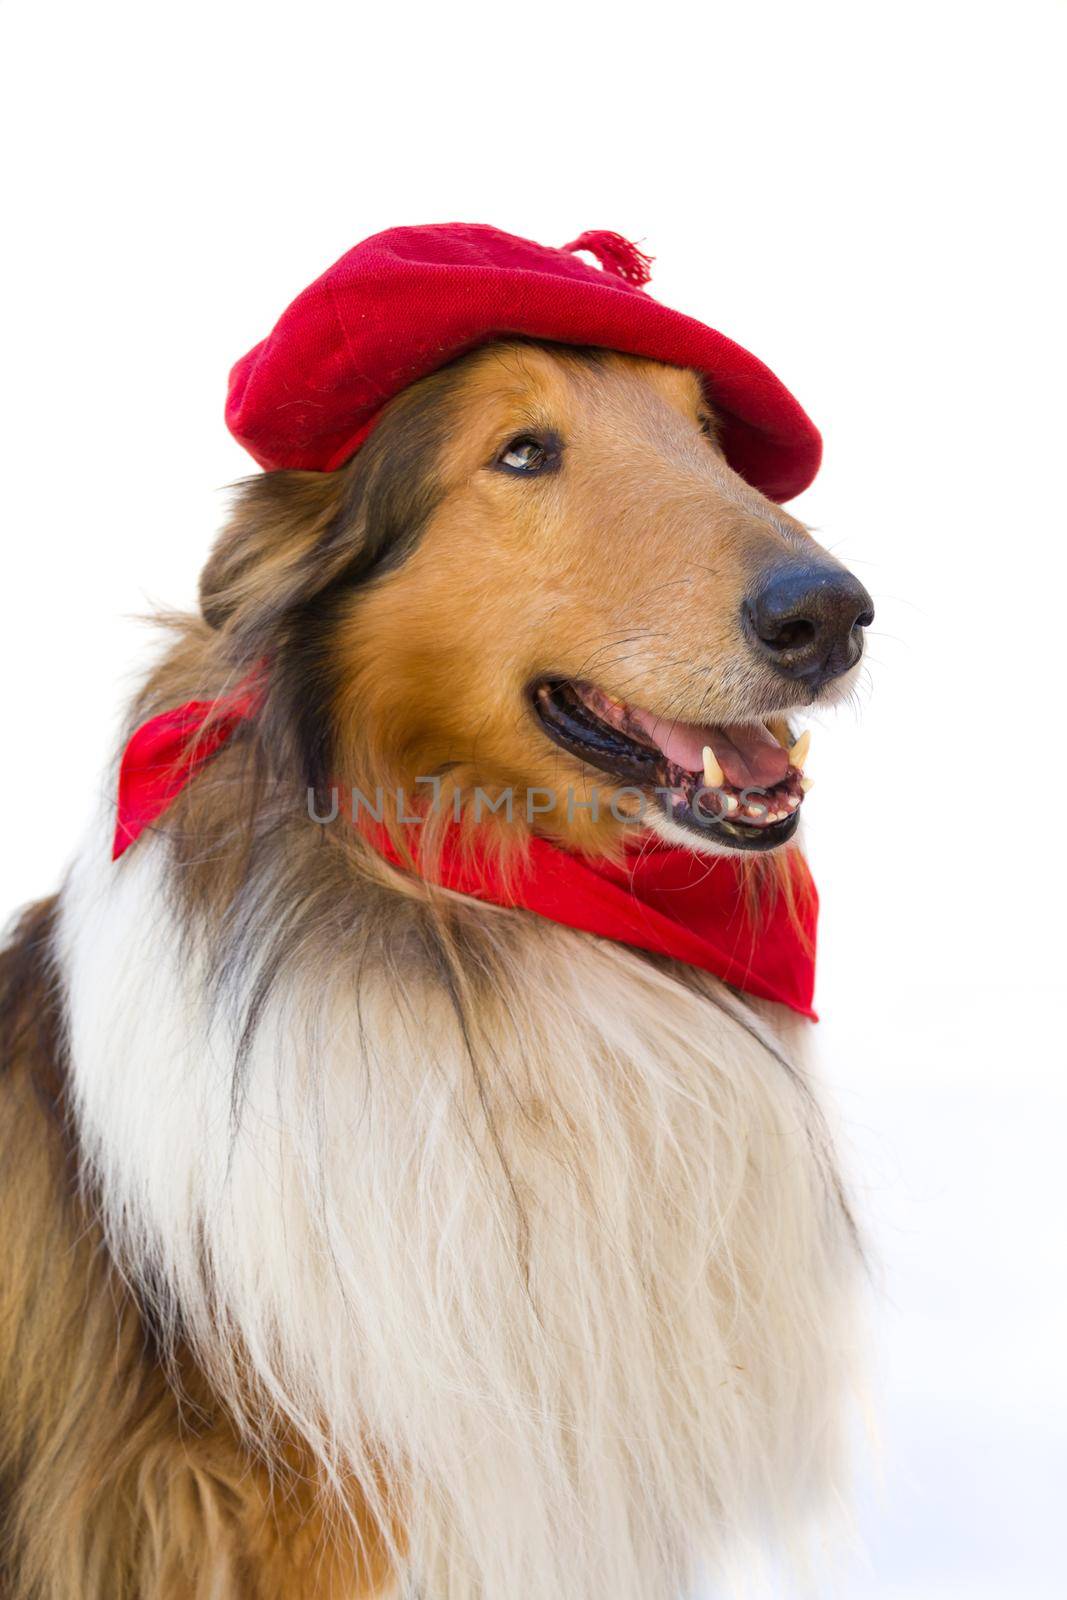 Portrait of rough collie with beret and red scarf on white background. San Fermin celebration